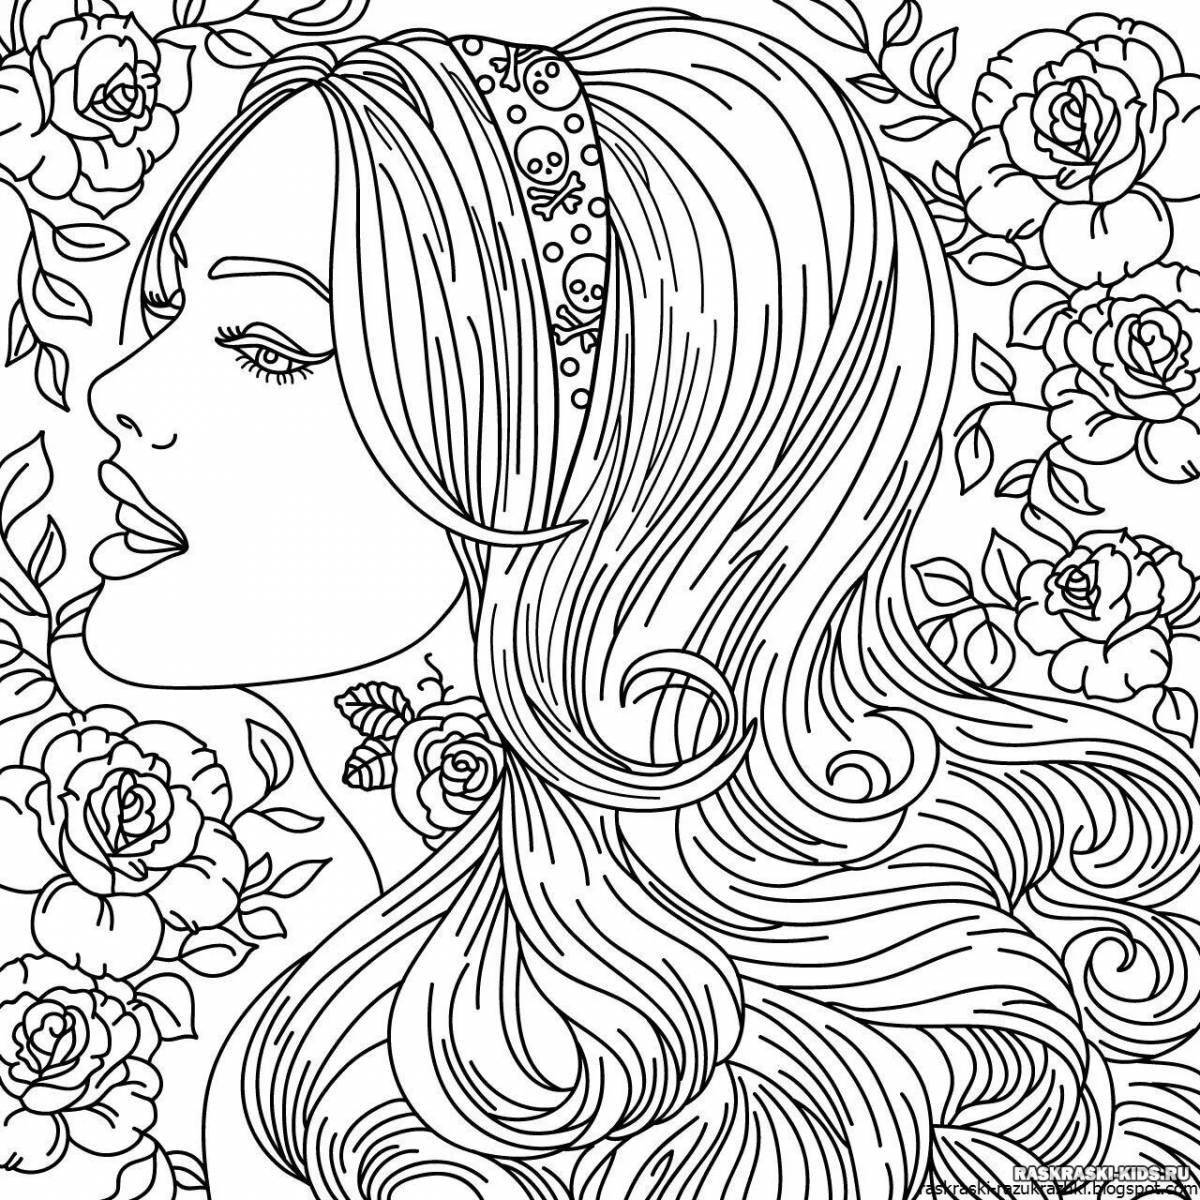 Exciting coloring book for 18 year old girls